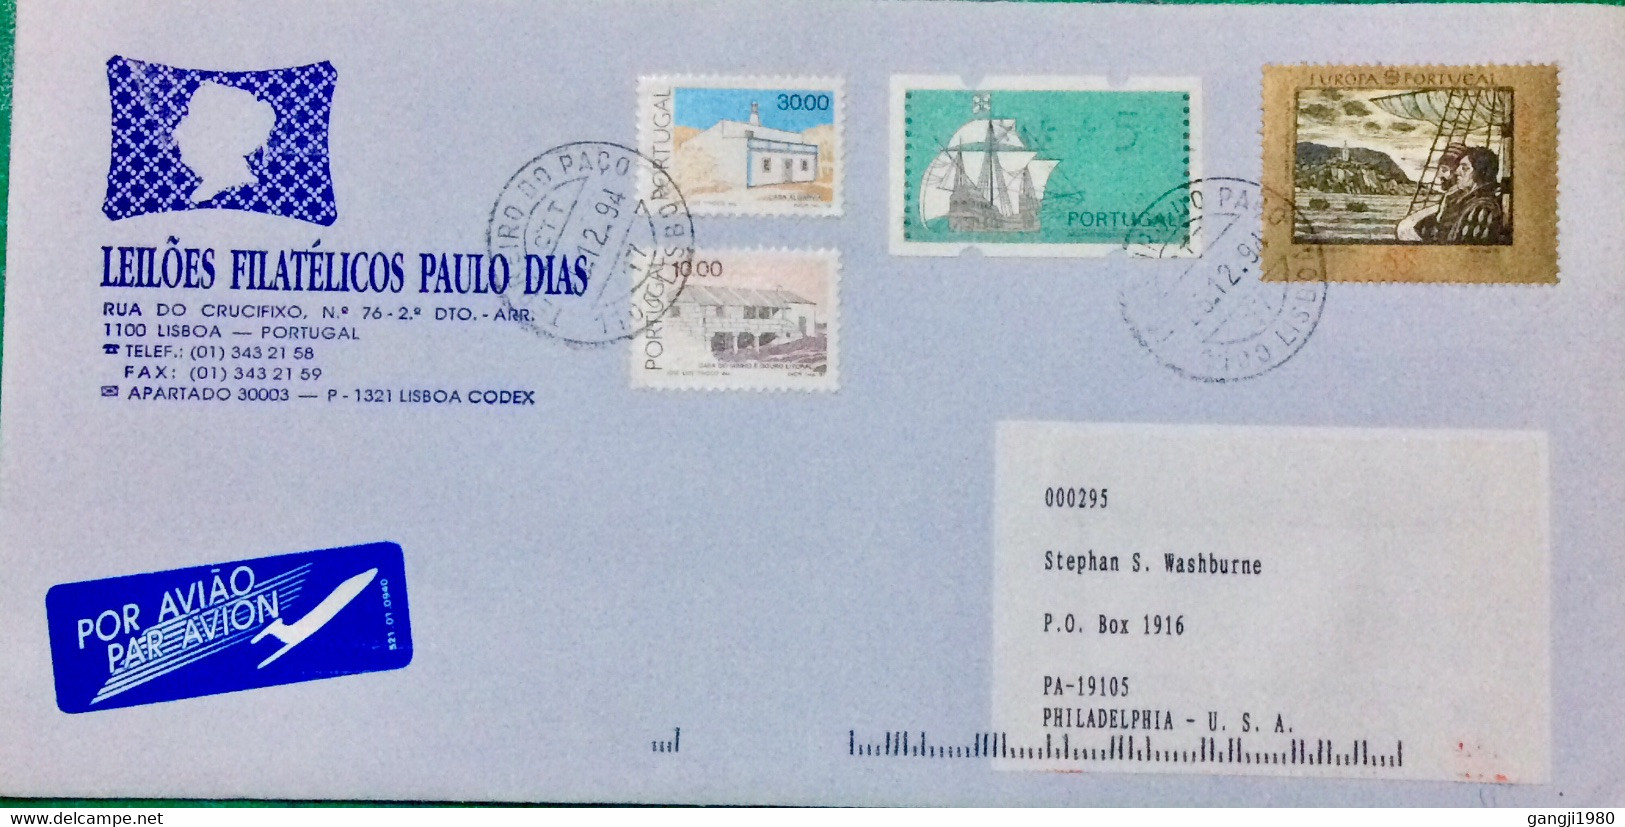 PORTUGAL 1994, ILLUSTRATED COVER USED TO USA, ATM SHIP STAMP, CASA ALGARVIA ,CASA DI MINHO, BUILDING, EUROPA, VIGNETTE A - Covers & Documents